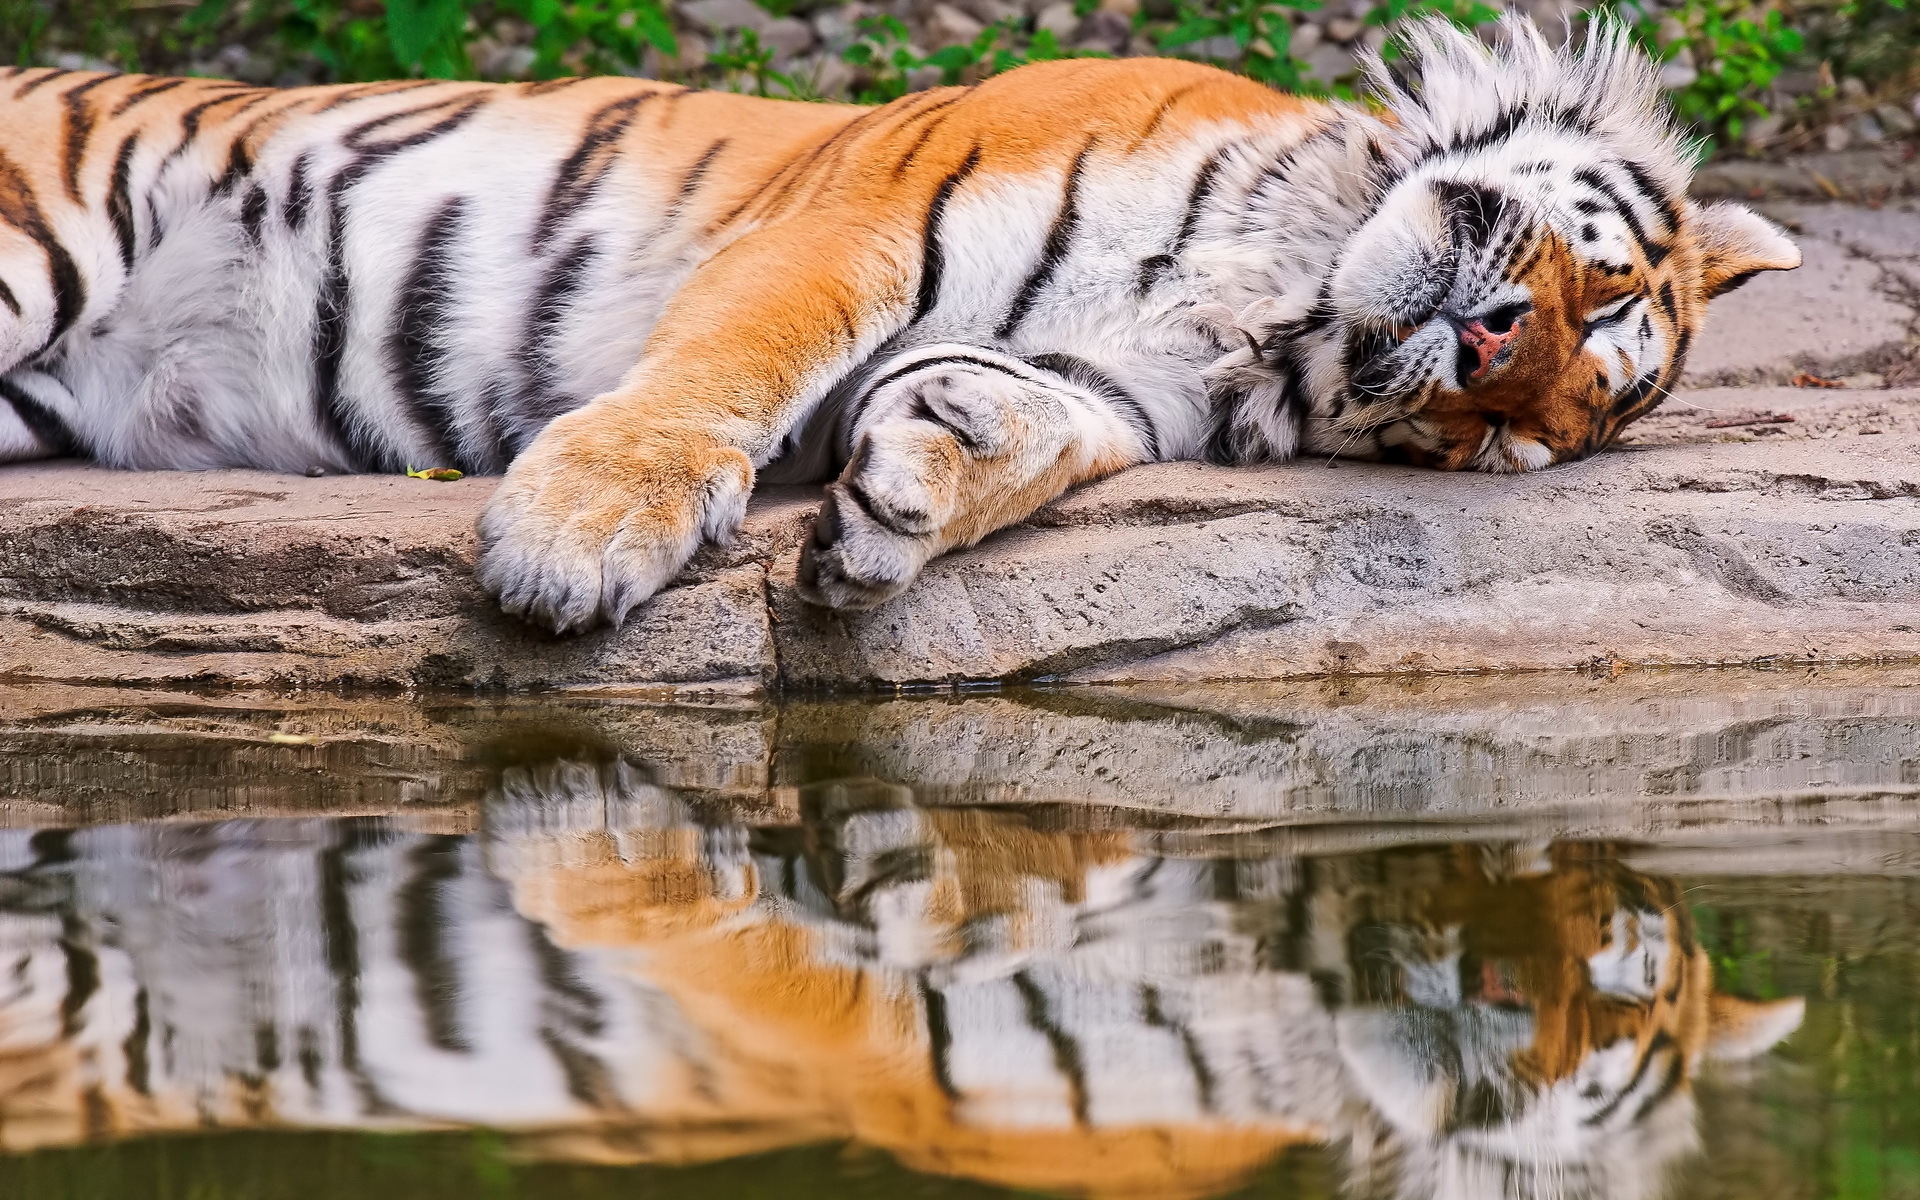 A tiger resting by the pond